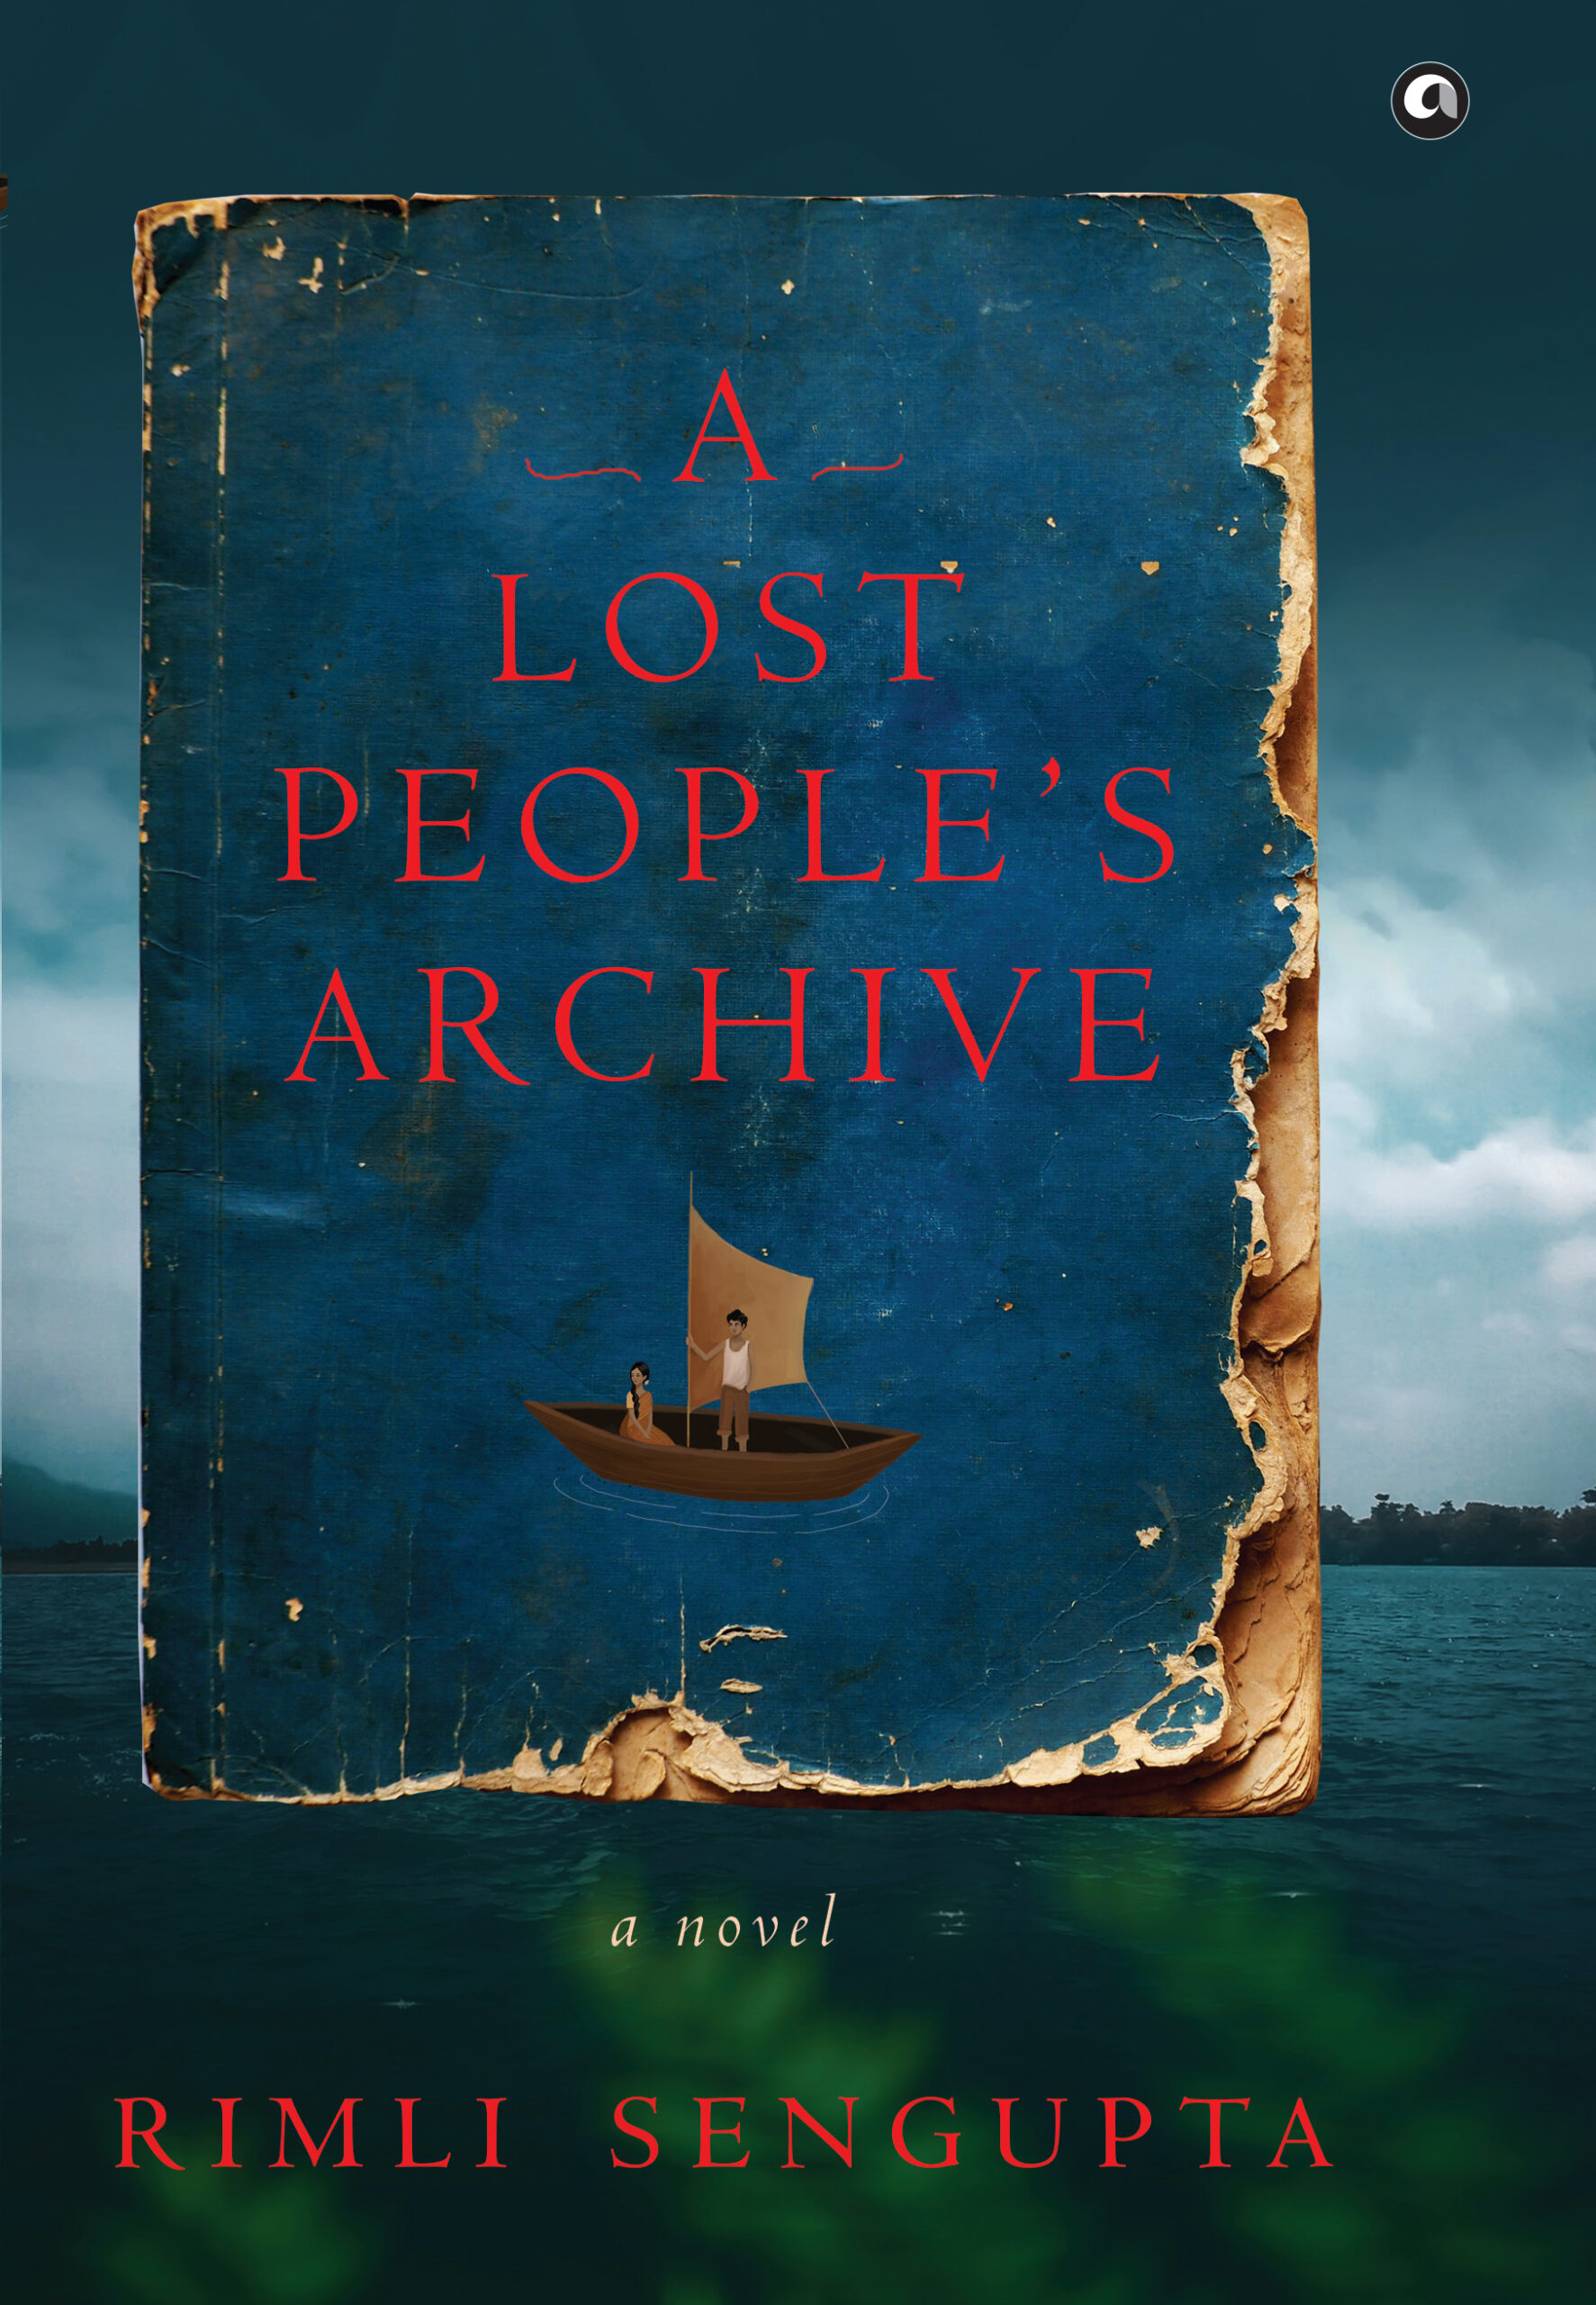 A Lost People’s Archive: A Novel